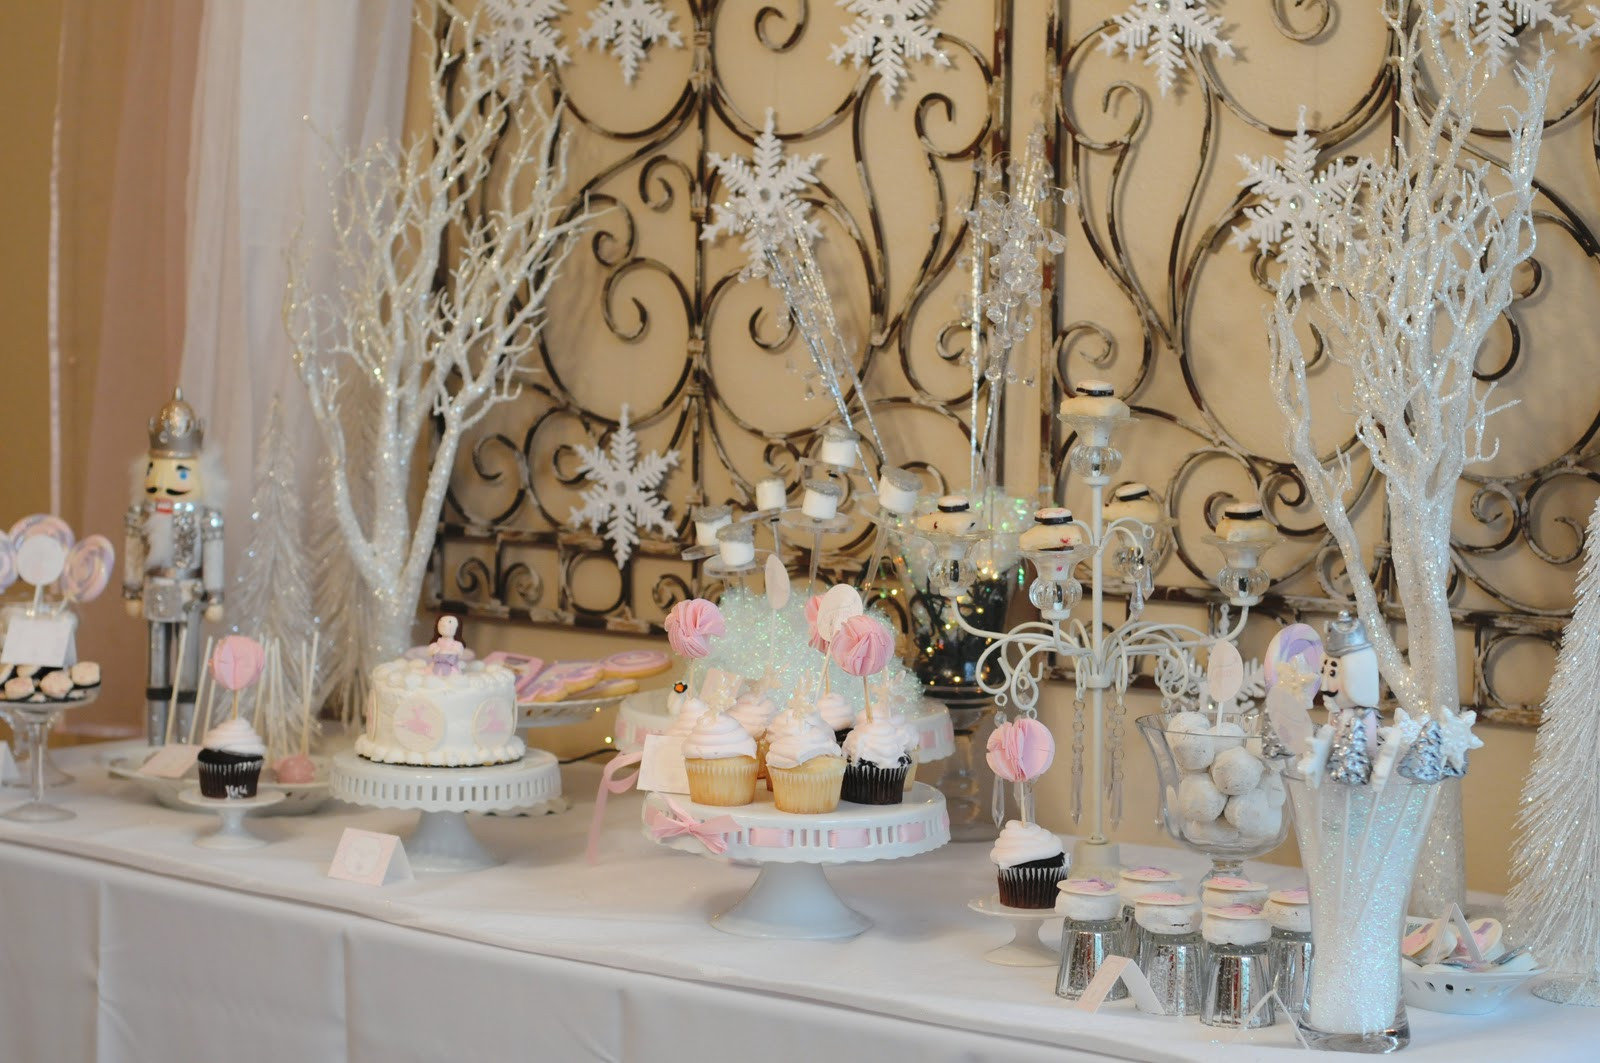 Winter Birthday Party Ideas For Adults
 Fanciful Events Wintry Sugar Plum Nutcracker Wonderland